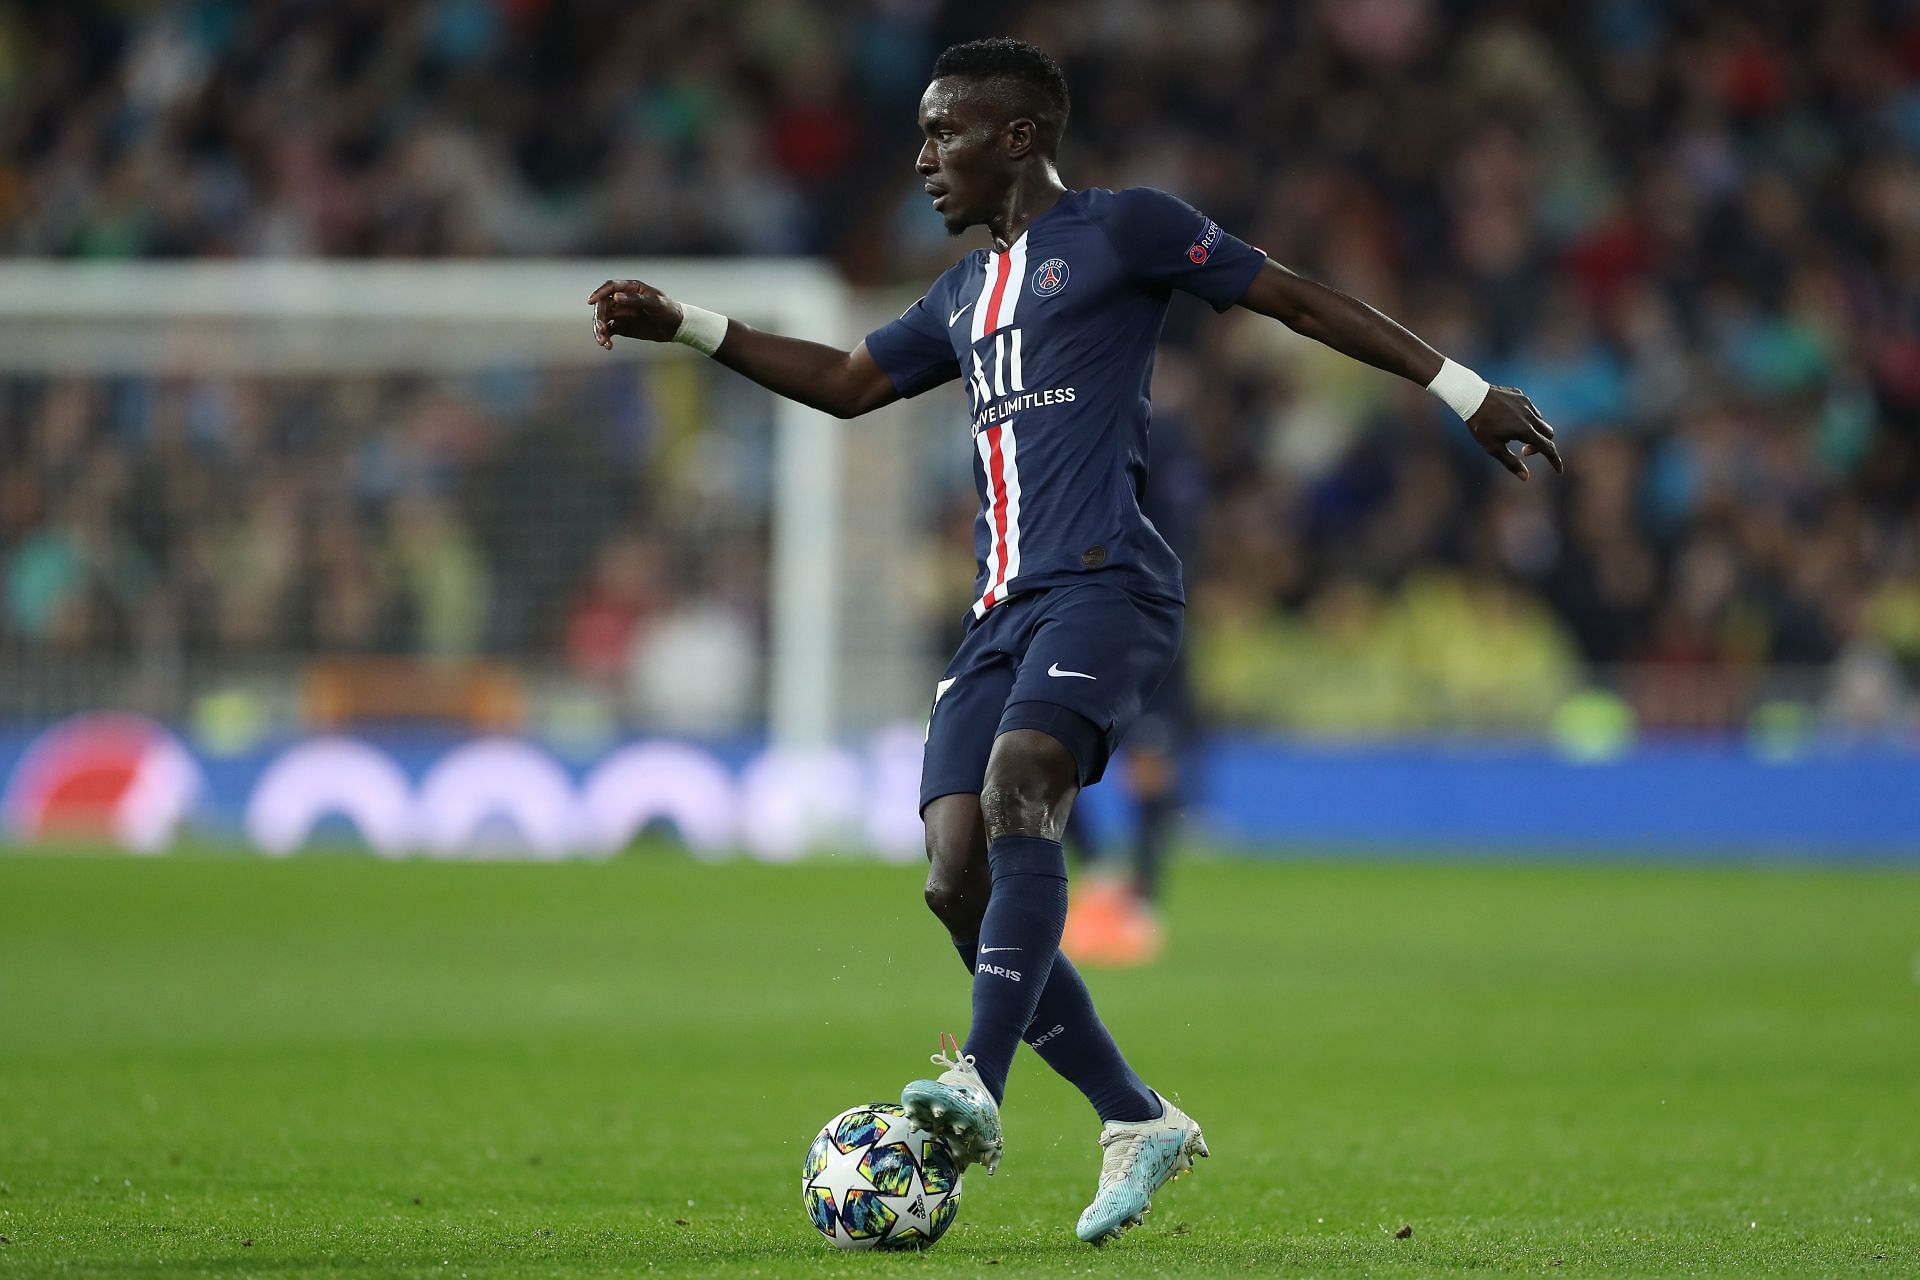 Gueye has been a rock in the PSG midfield